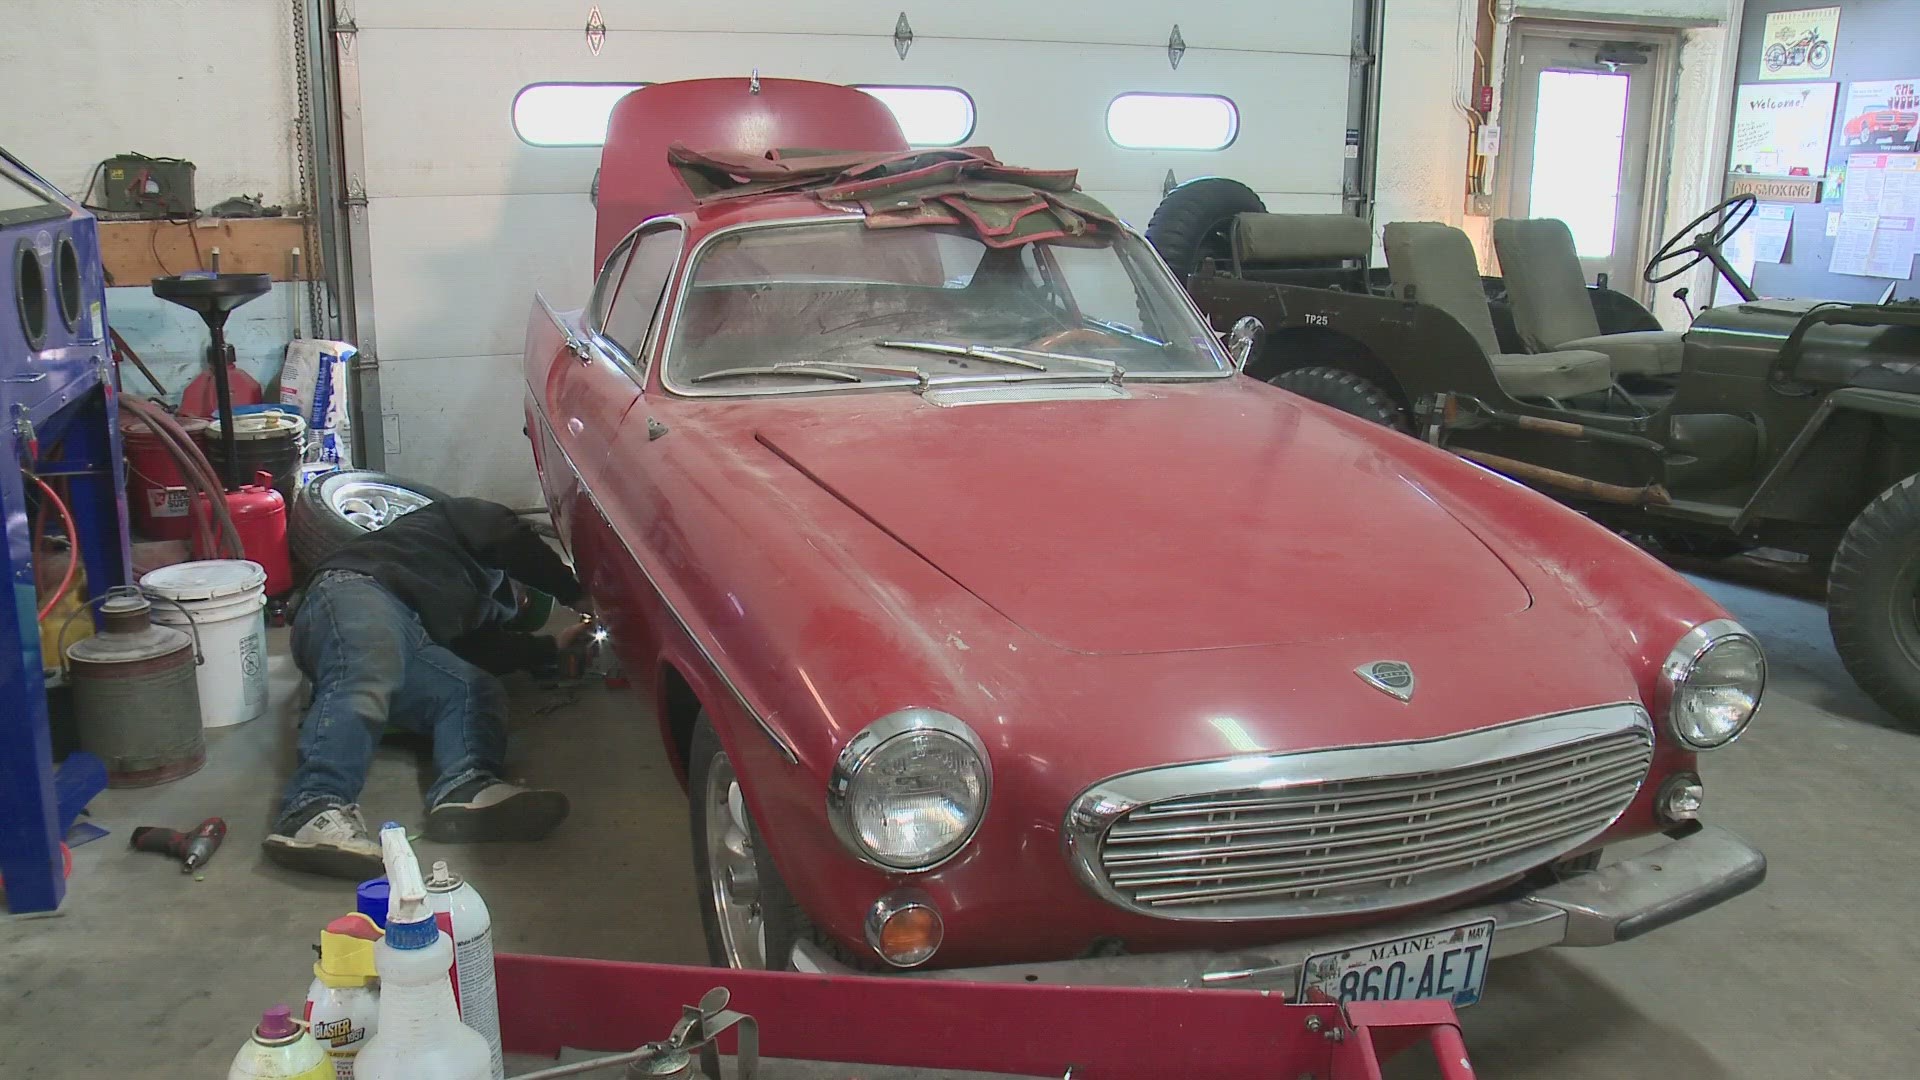 Phillip Reinhardt, 26, has a waiting list 30 cars long for his garage where he restores vintage and antique cars.